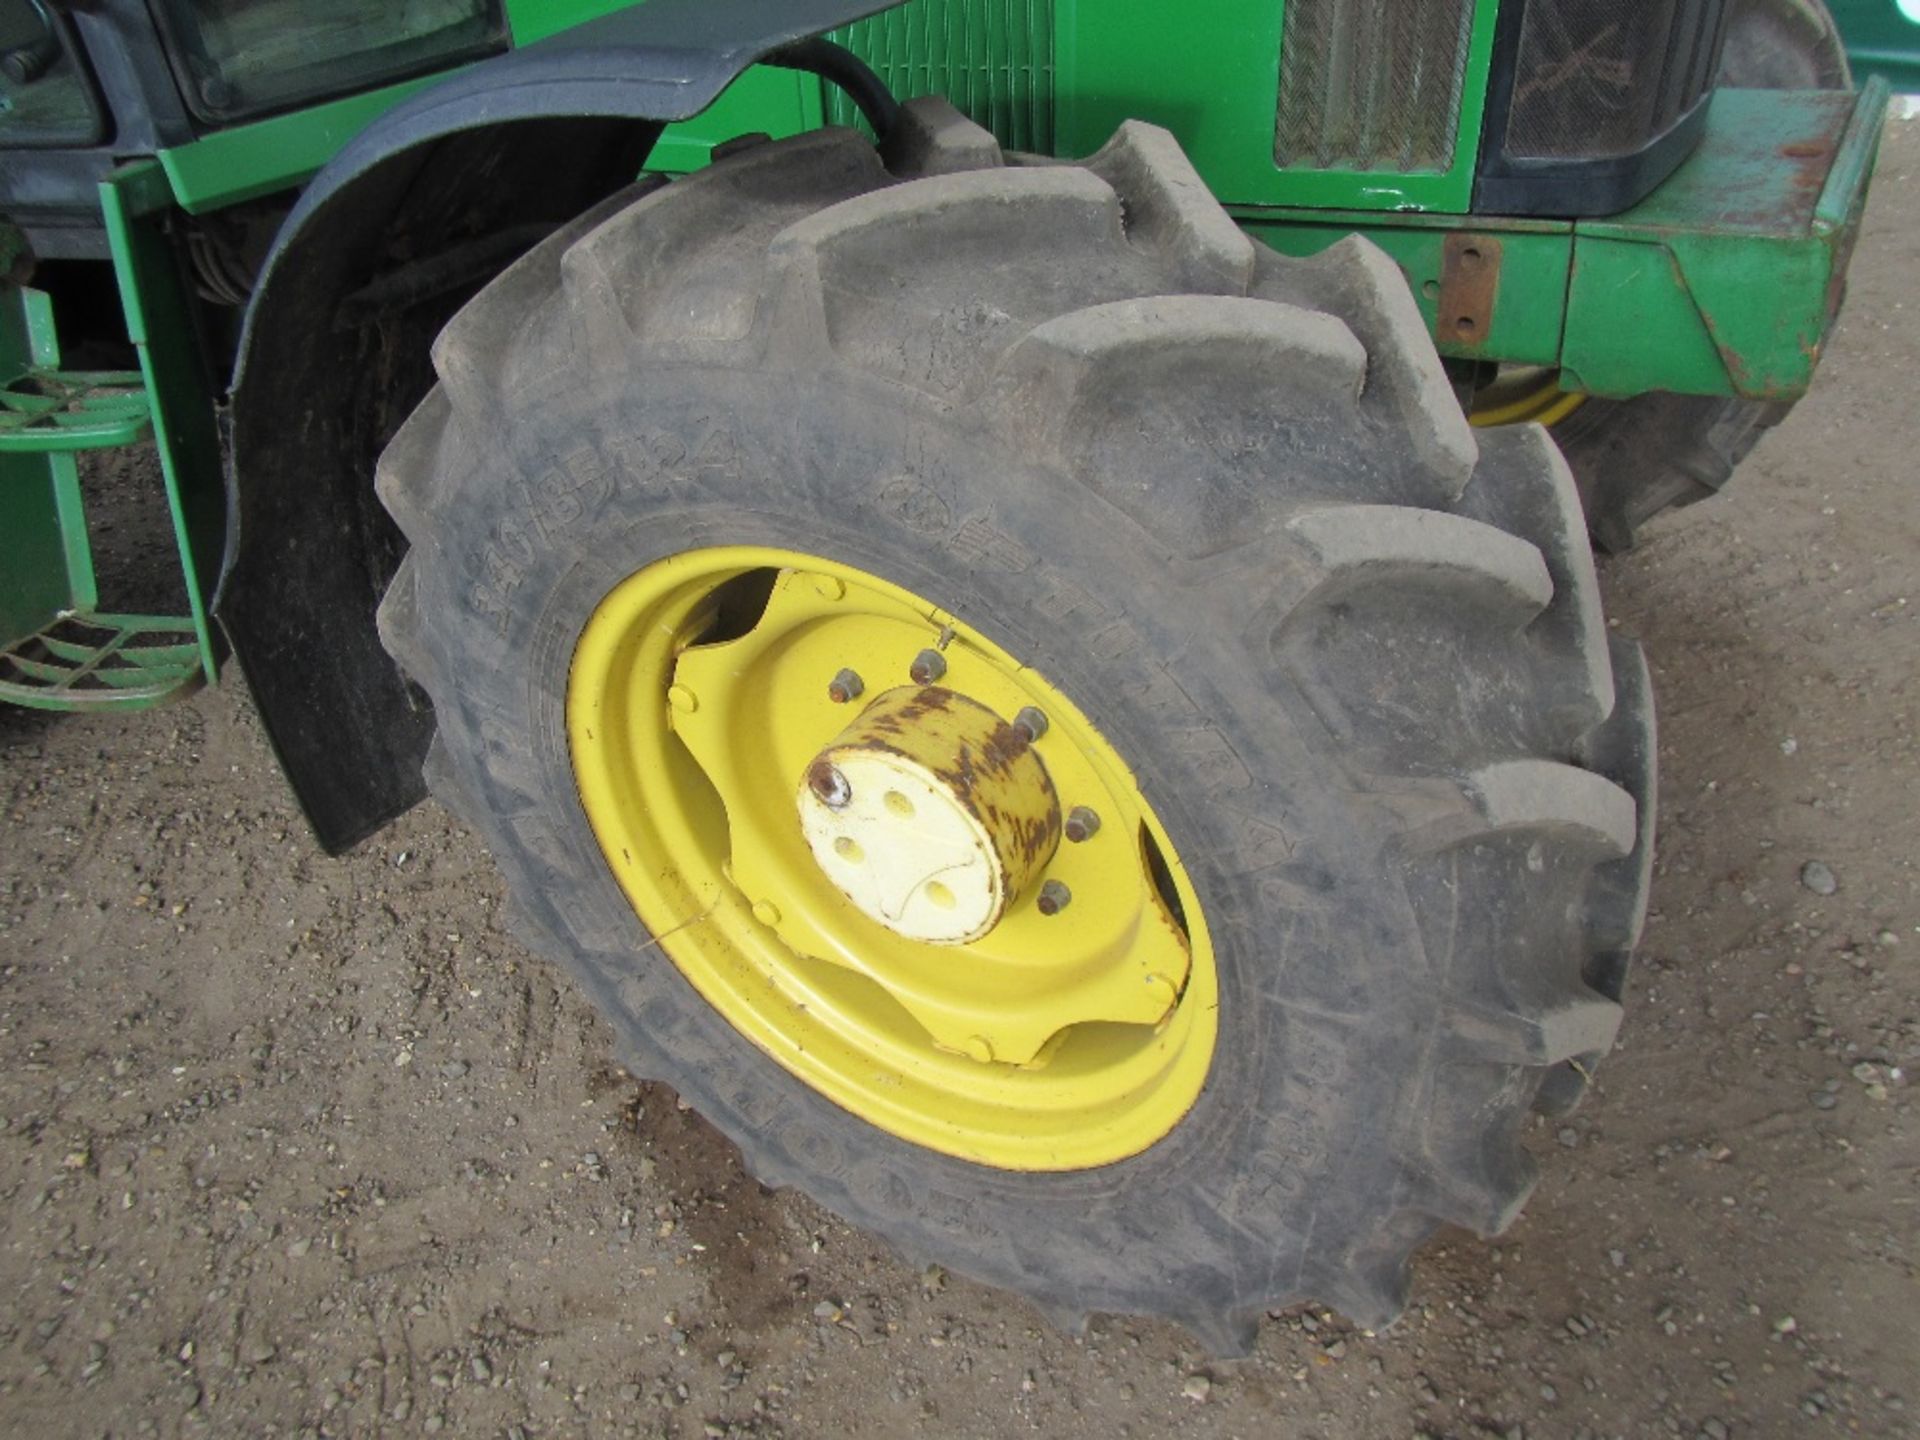 2000 John Deere 6010 4wd Tractor with Air Con & Creeper Gear. From Veg Rig. 4542 hrs. Reg No X153 - Image 4 of 17